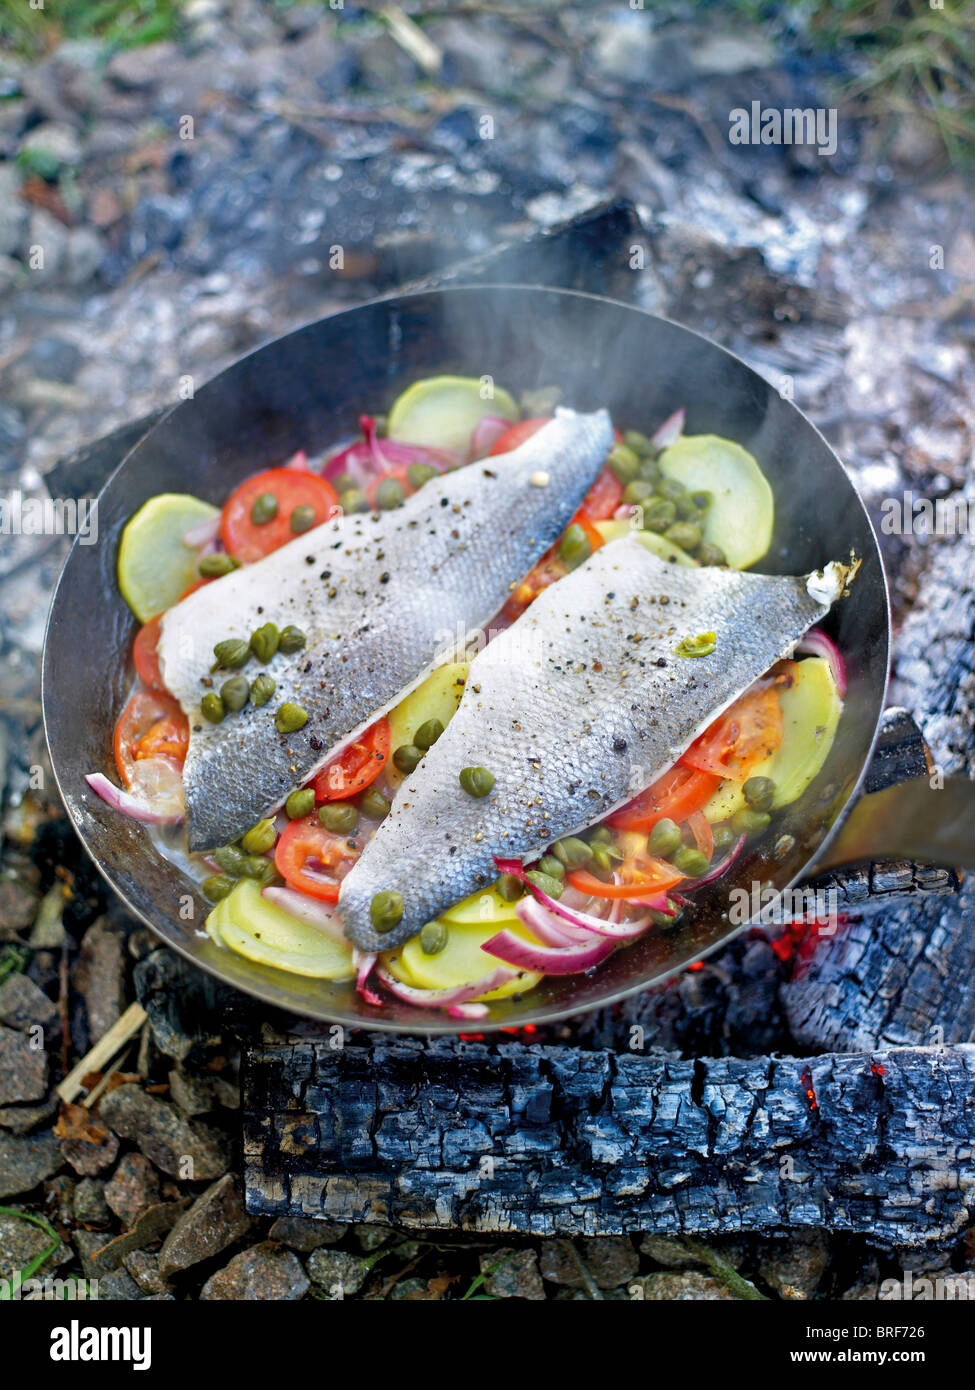 https://c8.alamy.com/comp/BRF726/fish-fillets-and-vegetables-cooking-in-pan-on-camp-fire-BRF726.jpg